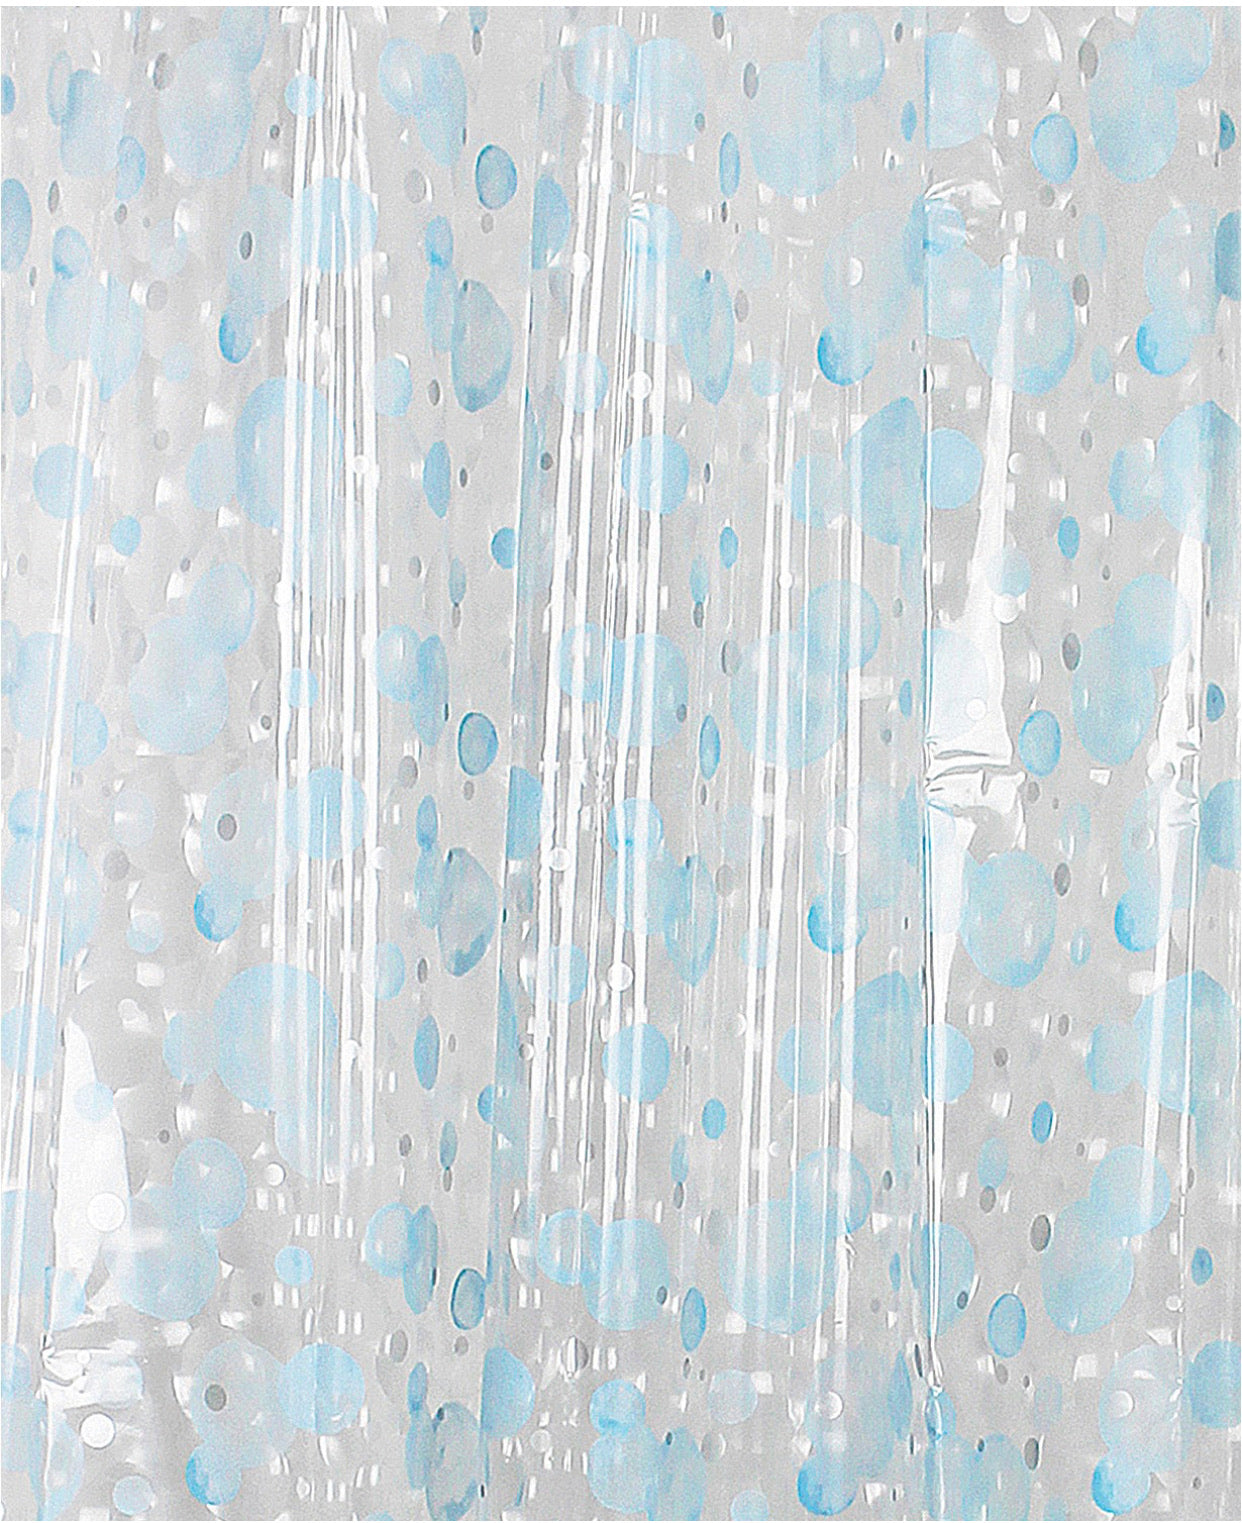 Dainty Home Bubbles 3D Eco-Friendly Embossed Textured Bubble Designed Shower Curtain Liner